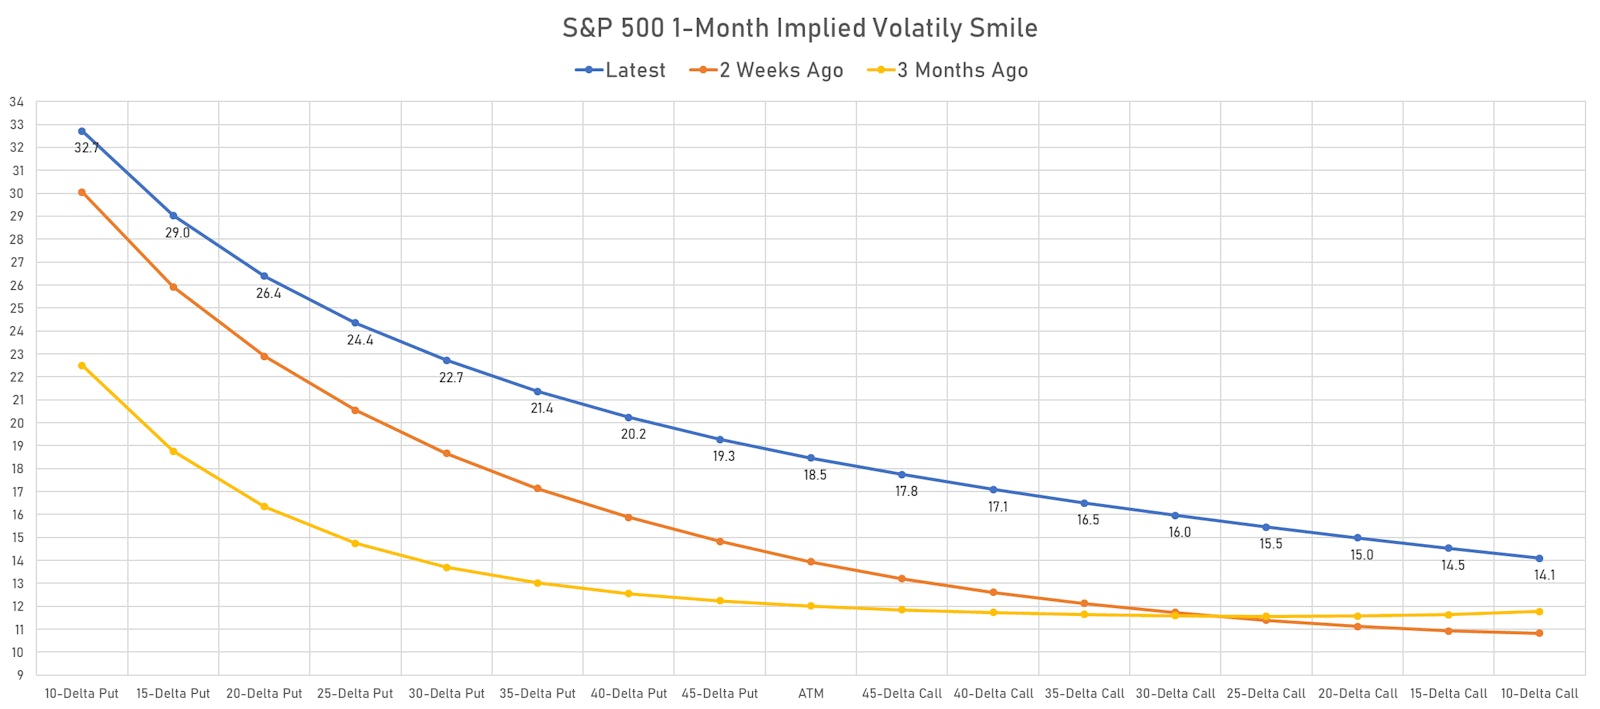 S&P 500 1-Month Implied Volatility Smile Remains Heavily Skewed To The Downside | Sources: ϕpost, Refinitiv data